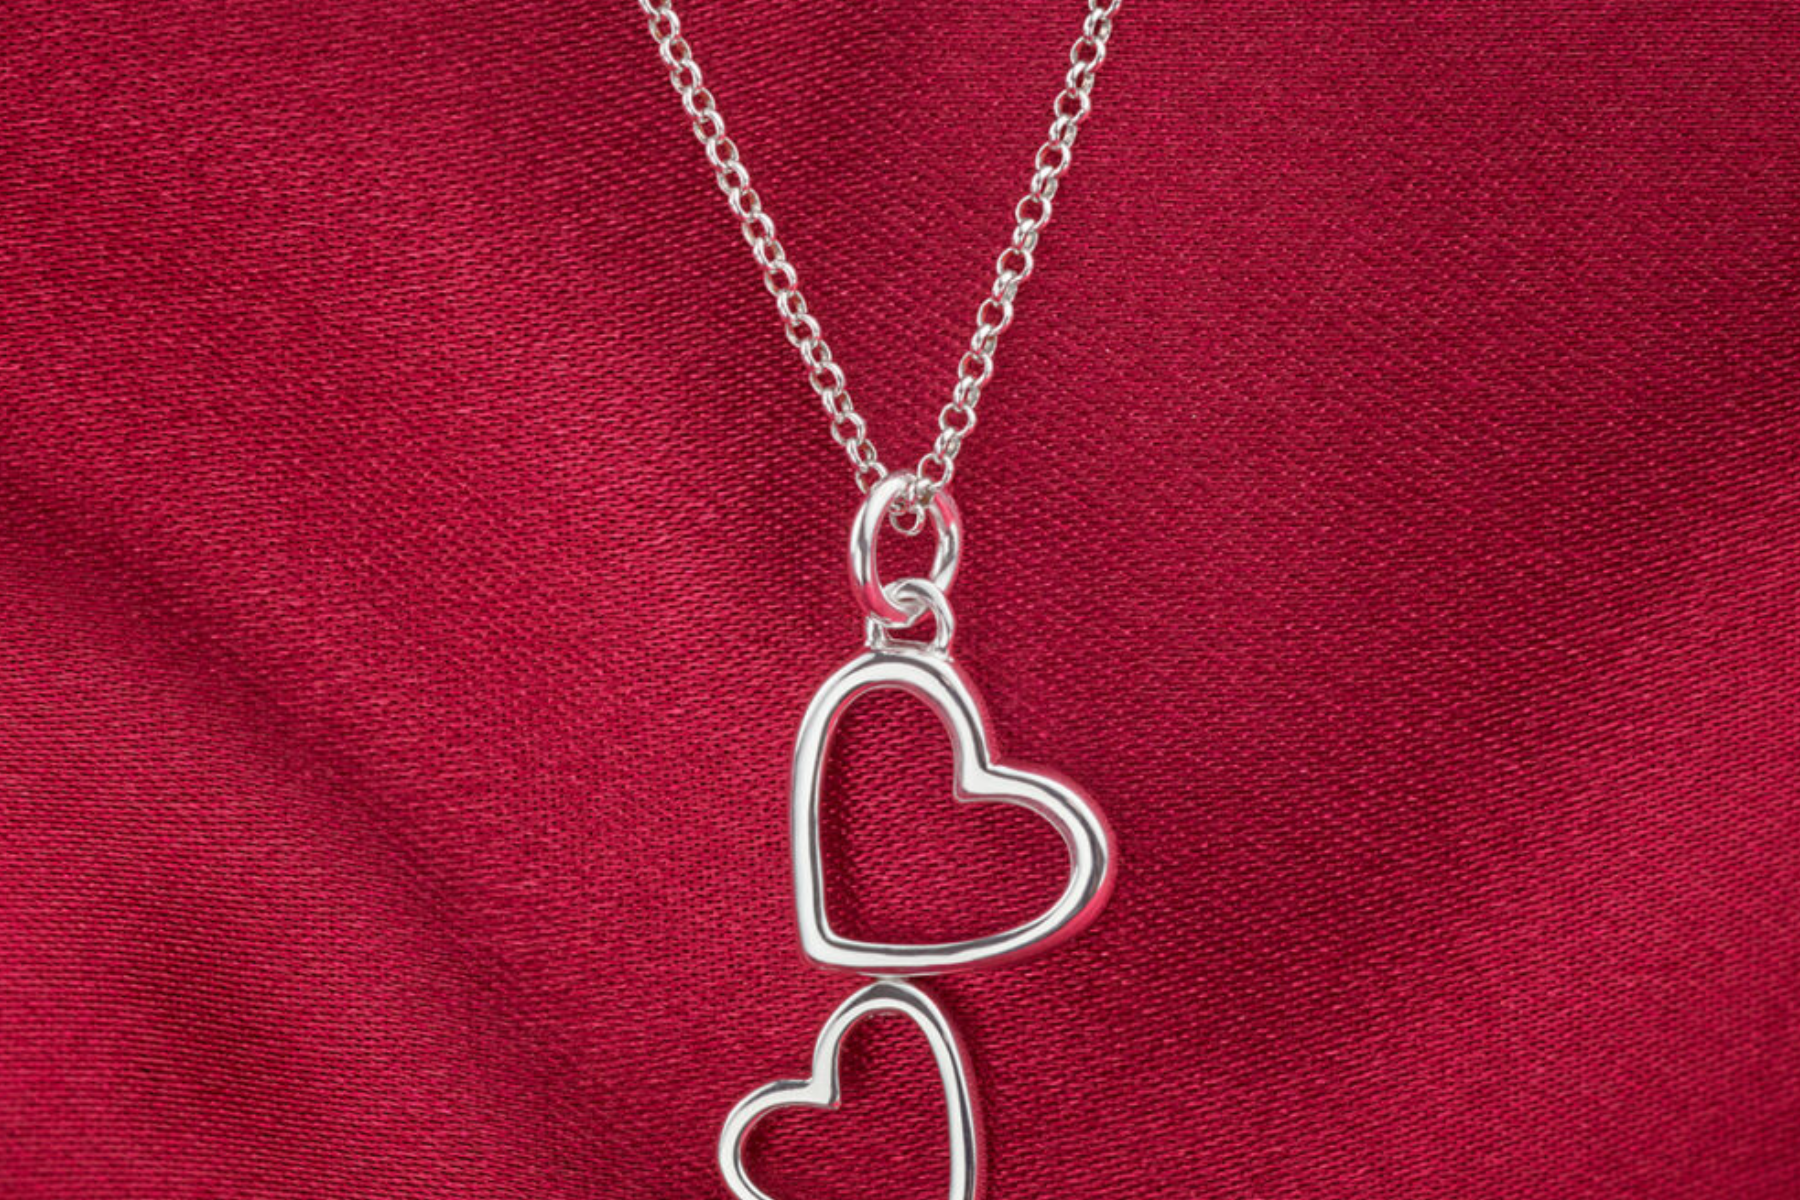 A silver heart necklace